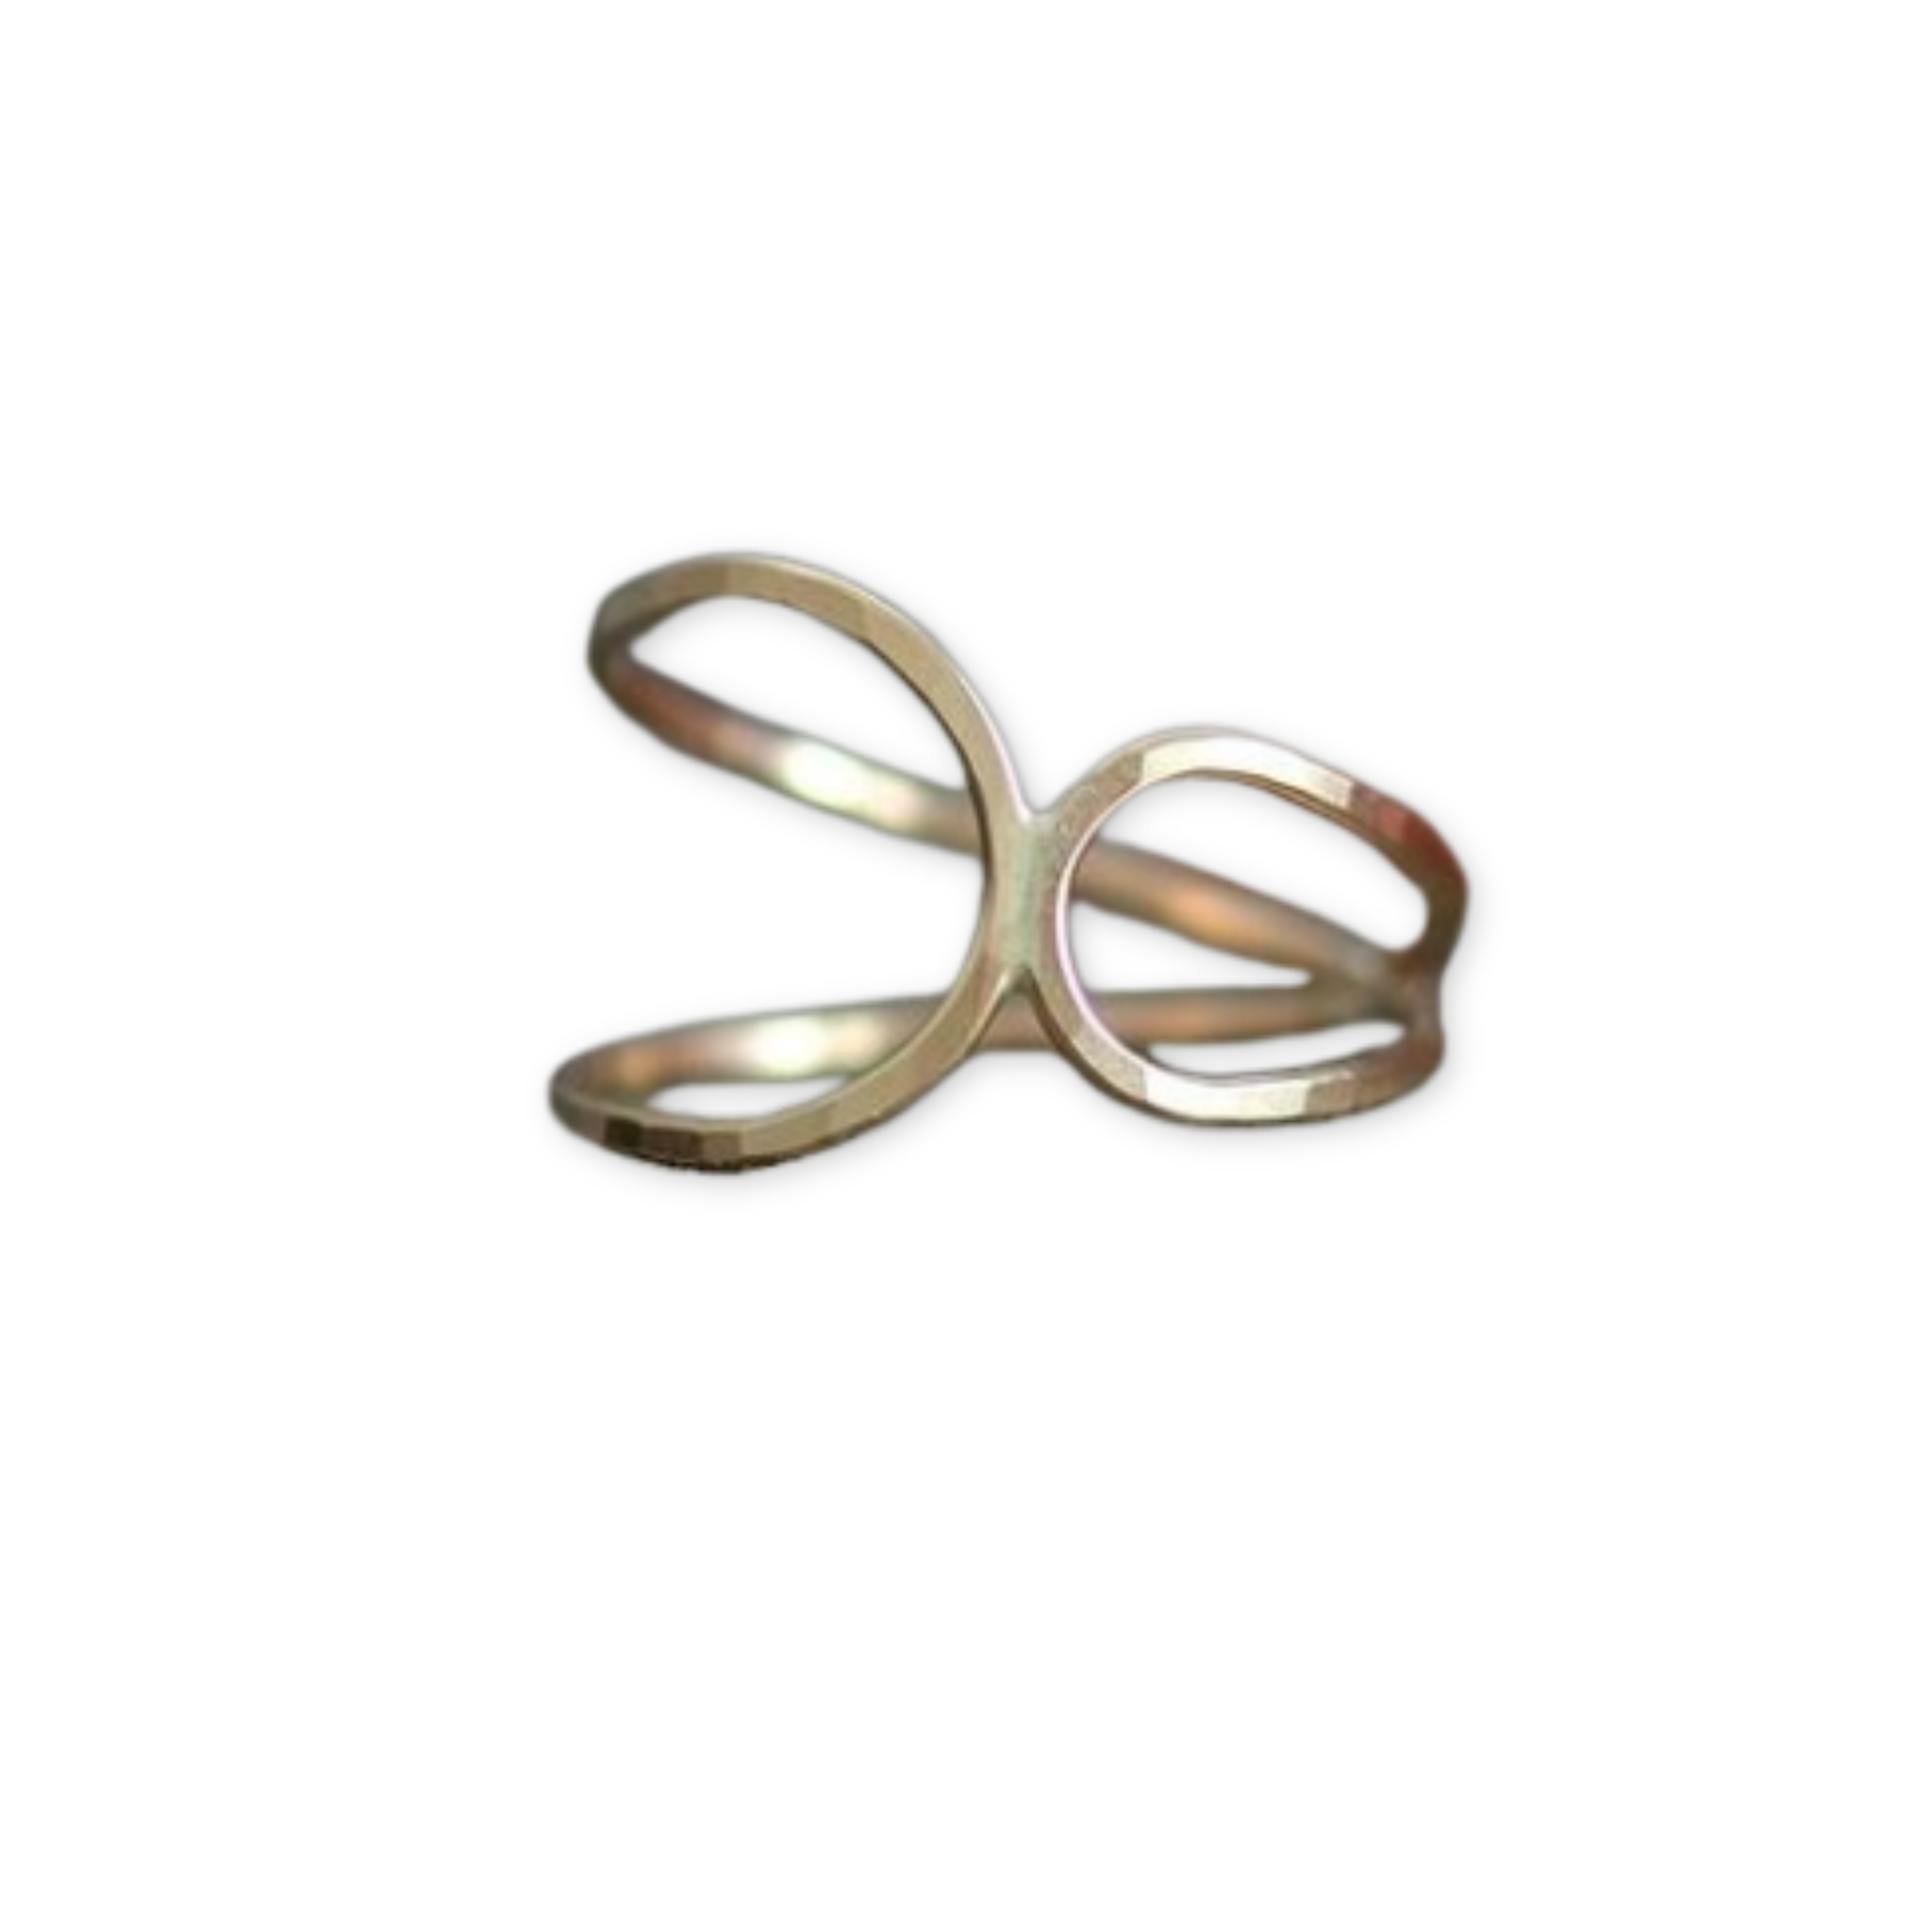 abstract figure eight ring